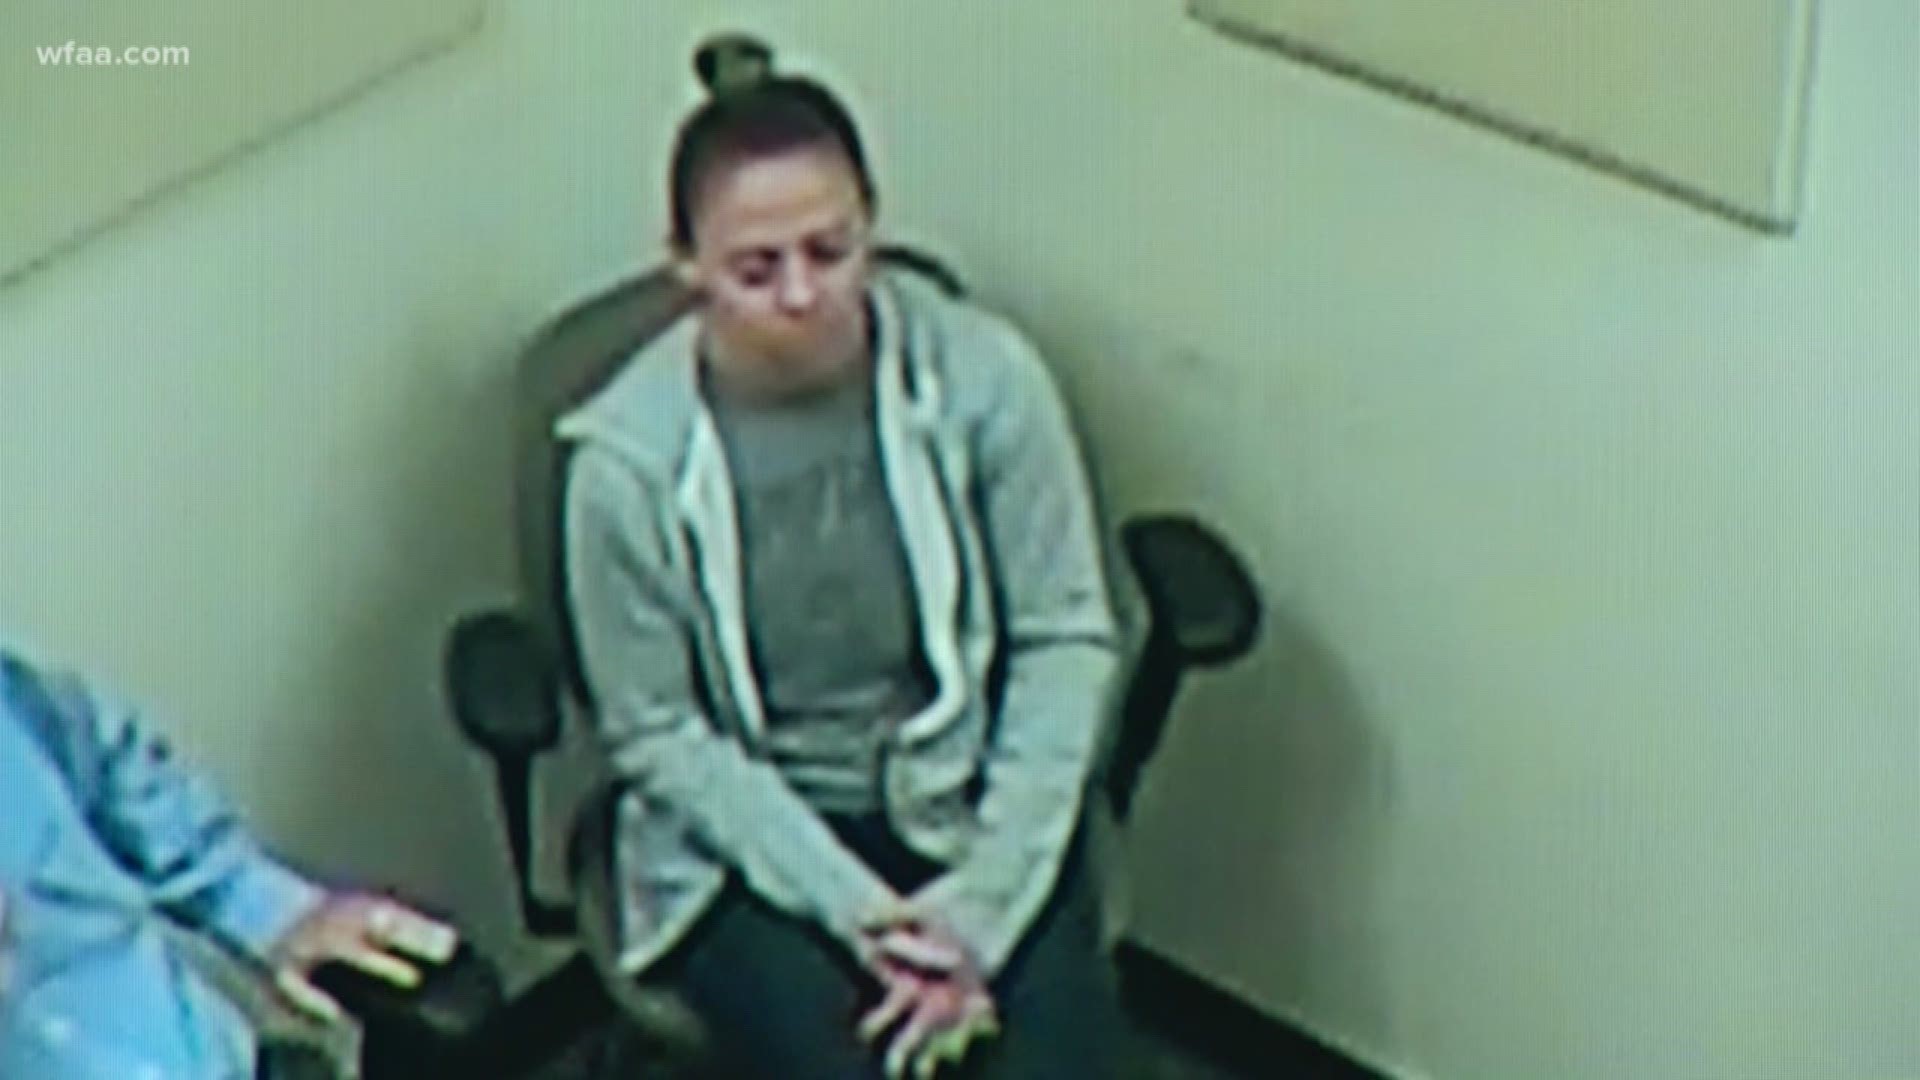 Not 24 hours after Amber Guyger shot and killed Botham Jean, she sat down with investigators. WFAA obtained the whole video in a records request.